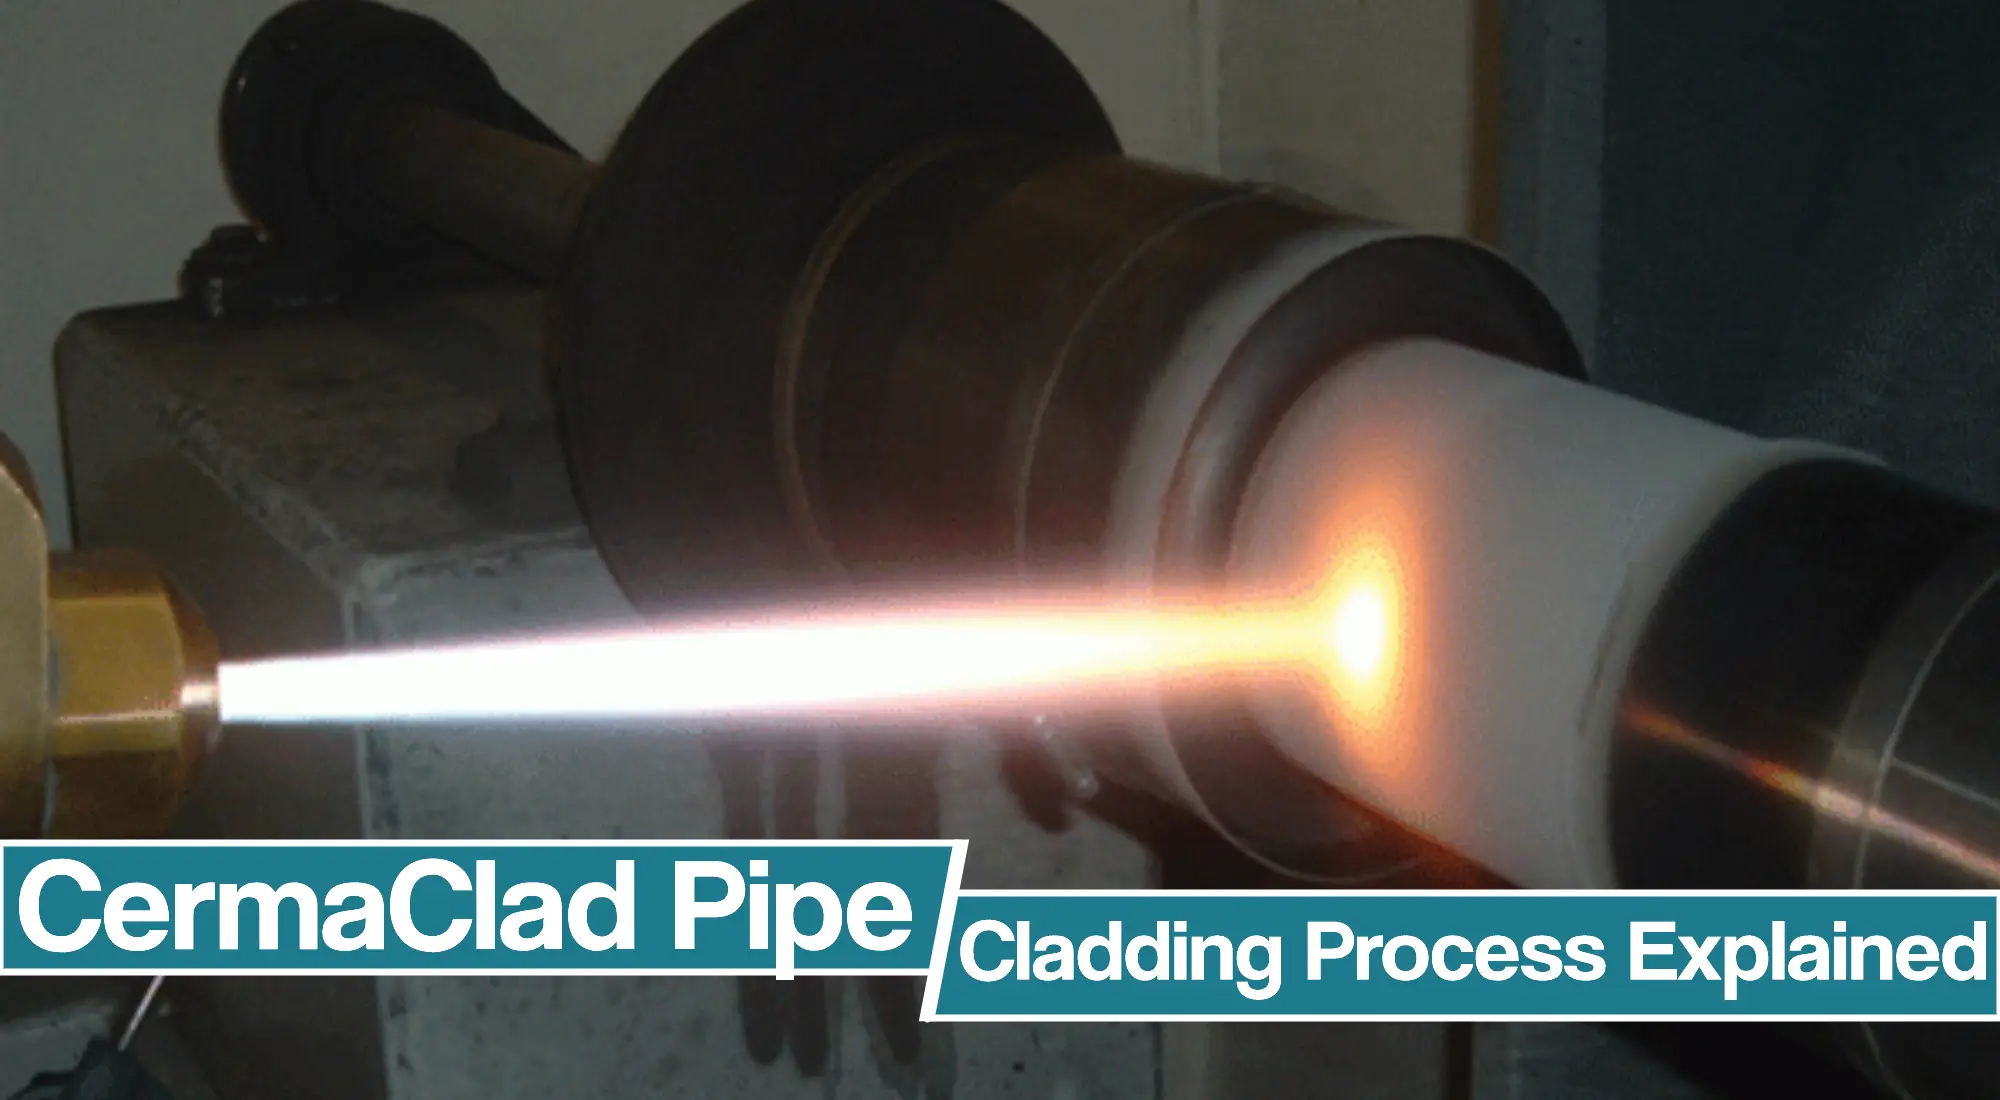 CermaClad Pipe Cladding Process Explained